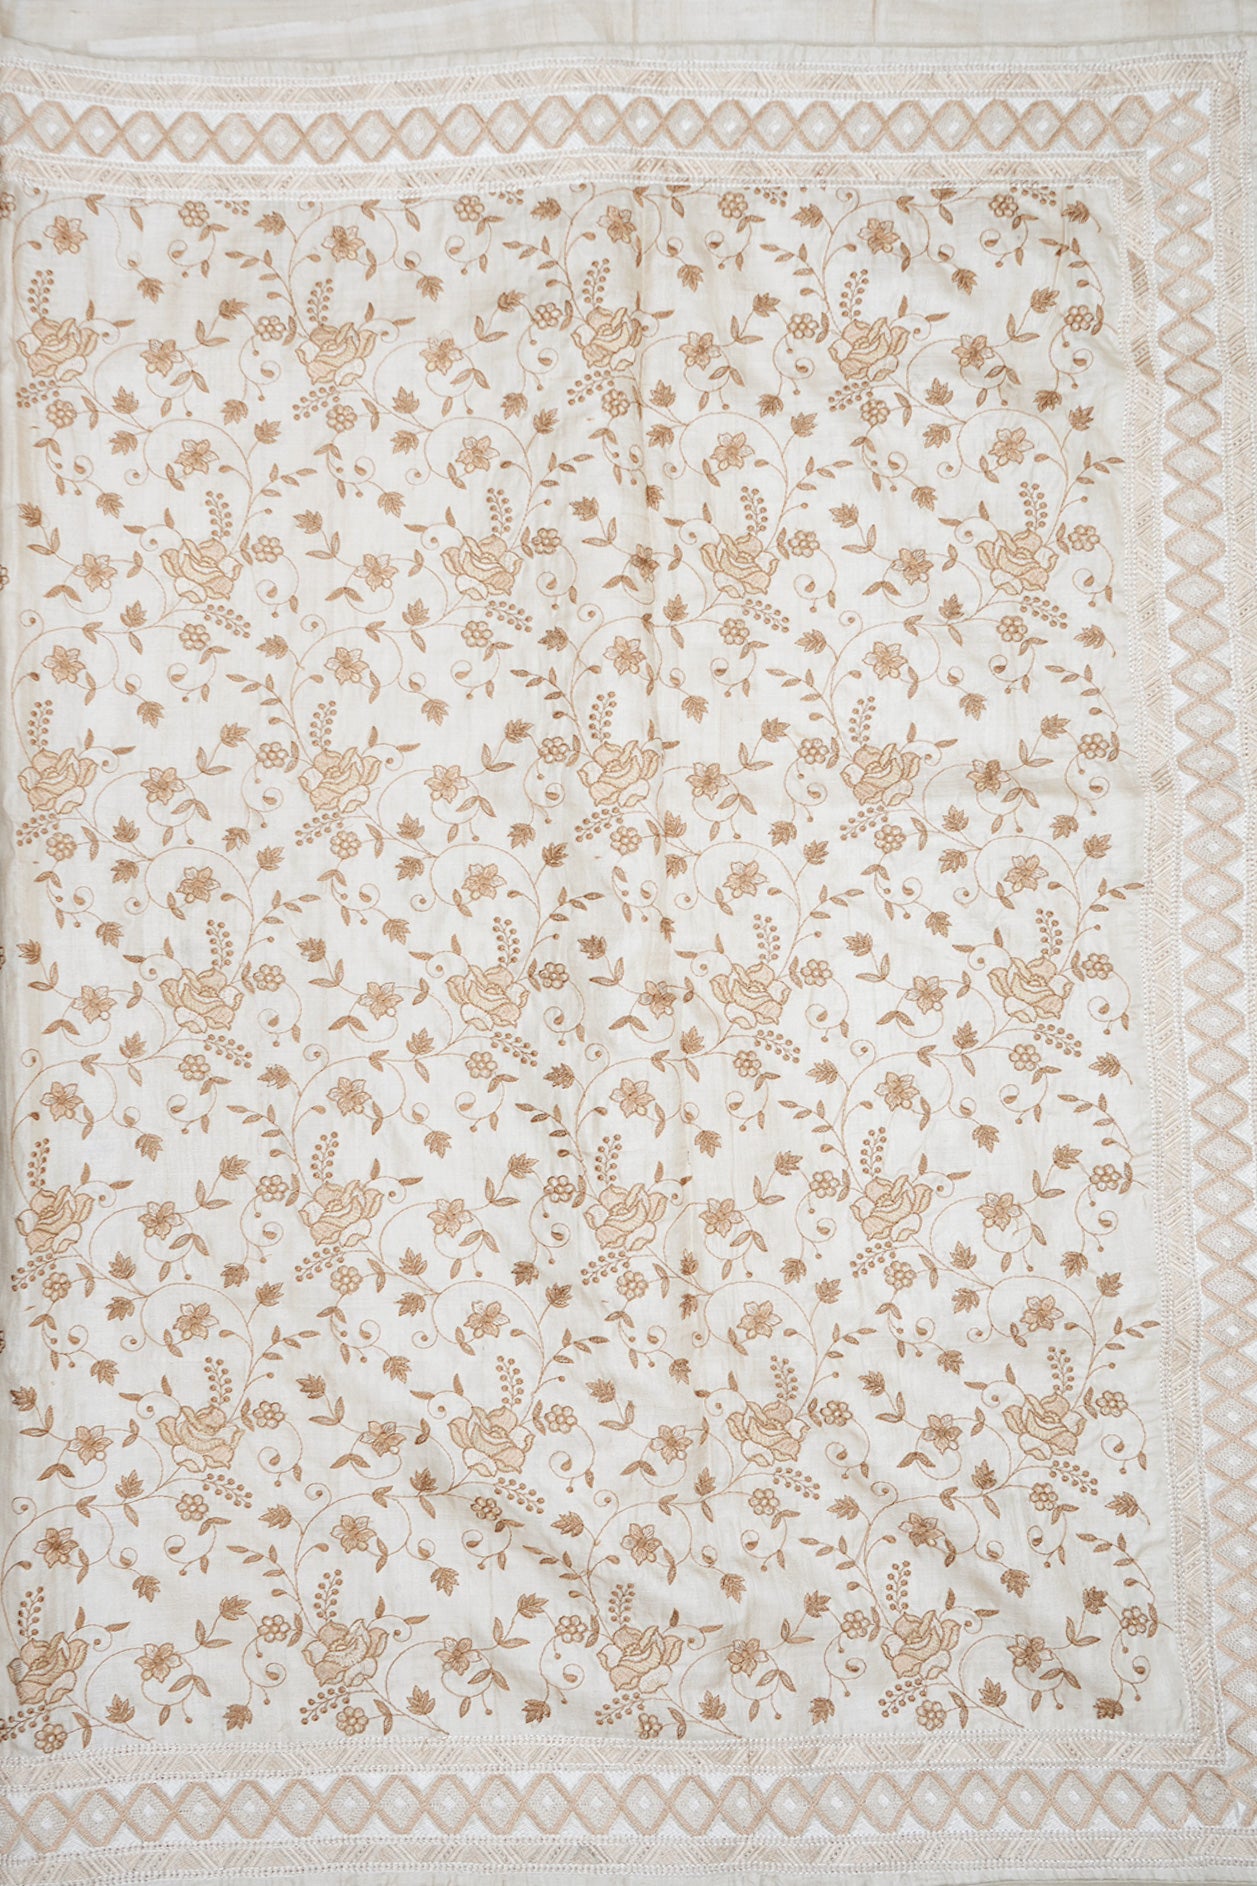 Embroidered Border With Floral Motifs Ivory Tussar Silk Saree